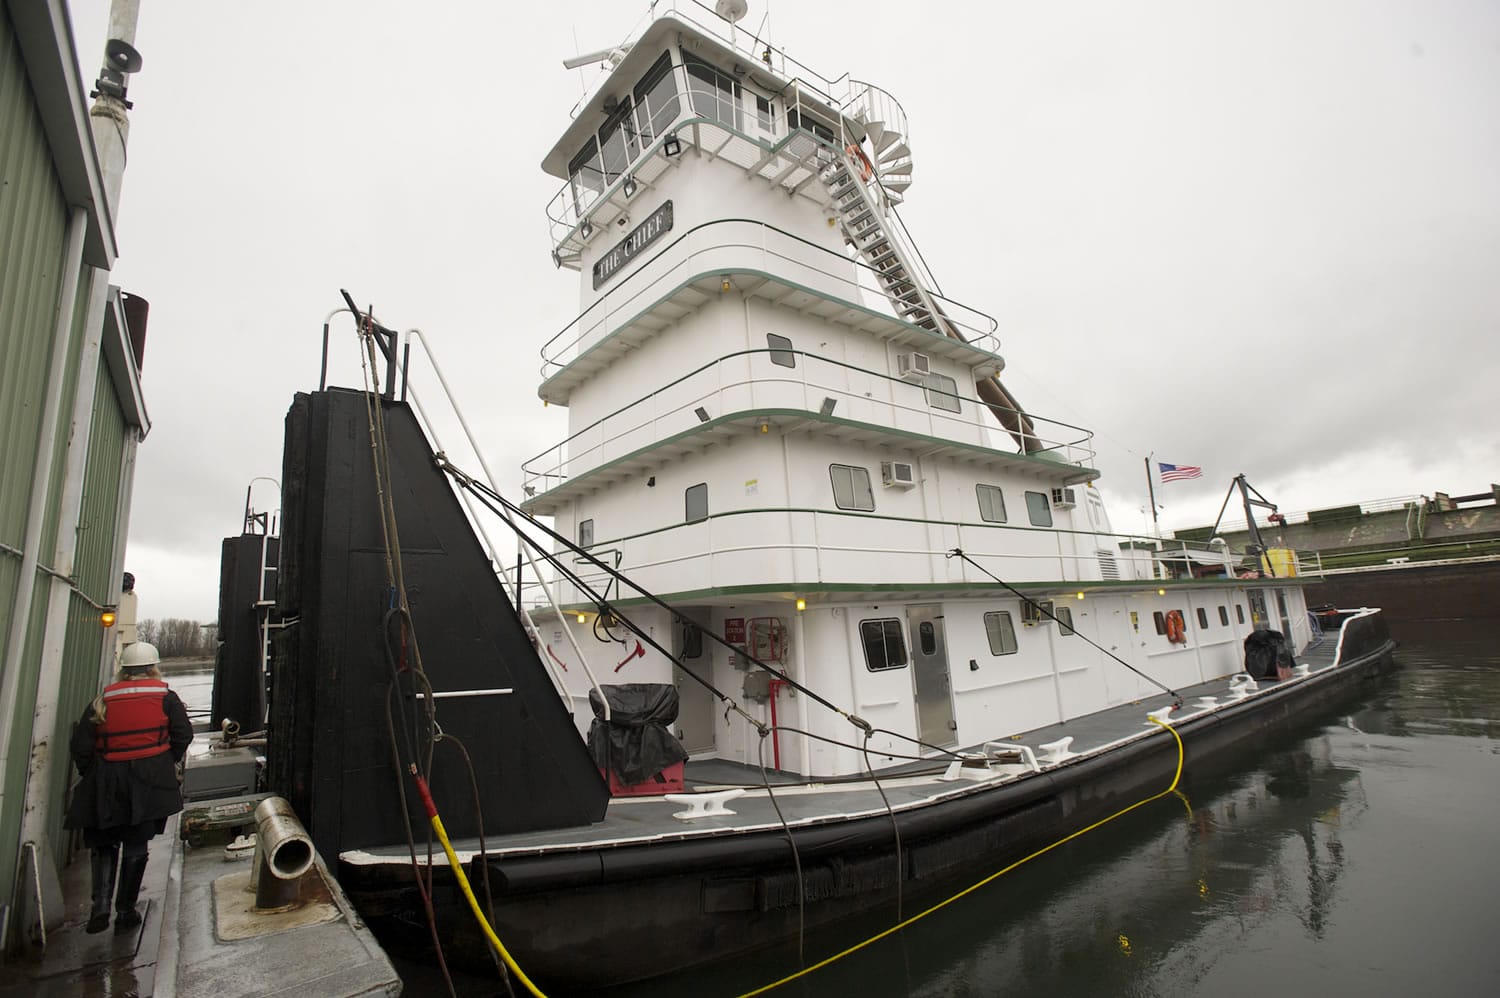 Tidewater Barge Lines, the largest inland marine transportation company west of the Mississippi River, has a fleet of 16 tugboats, including Chief, above, and 172 barges.